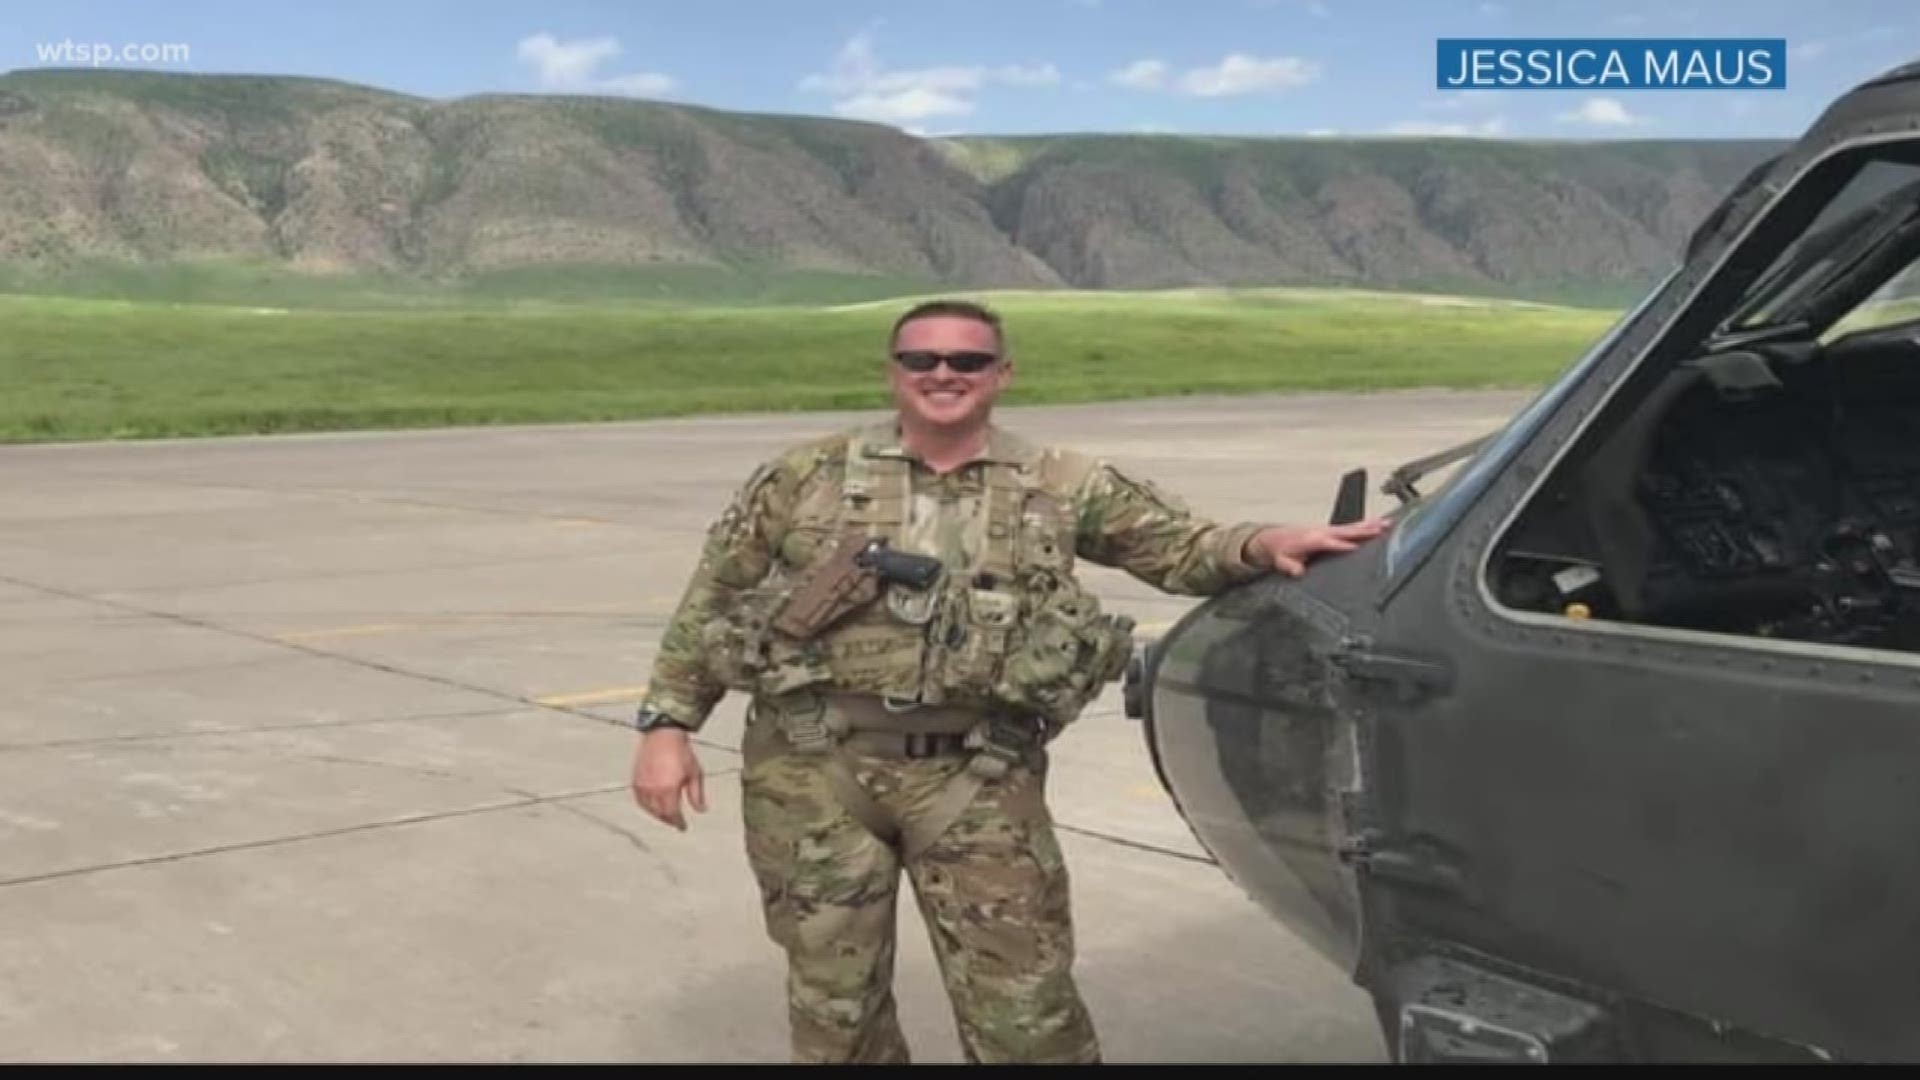 Lieutenant Travis Maus has been a member of the US Army Reserve for almost 15 years. He had been serving in with his company, the "Ghostriders.”